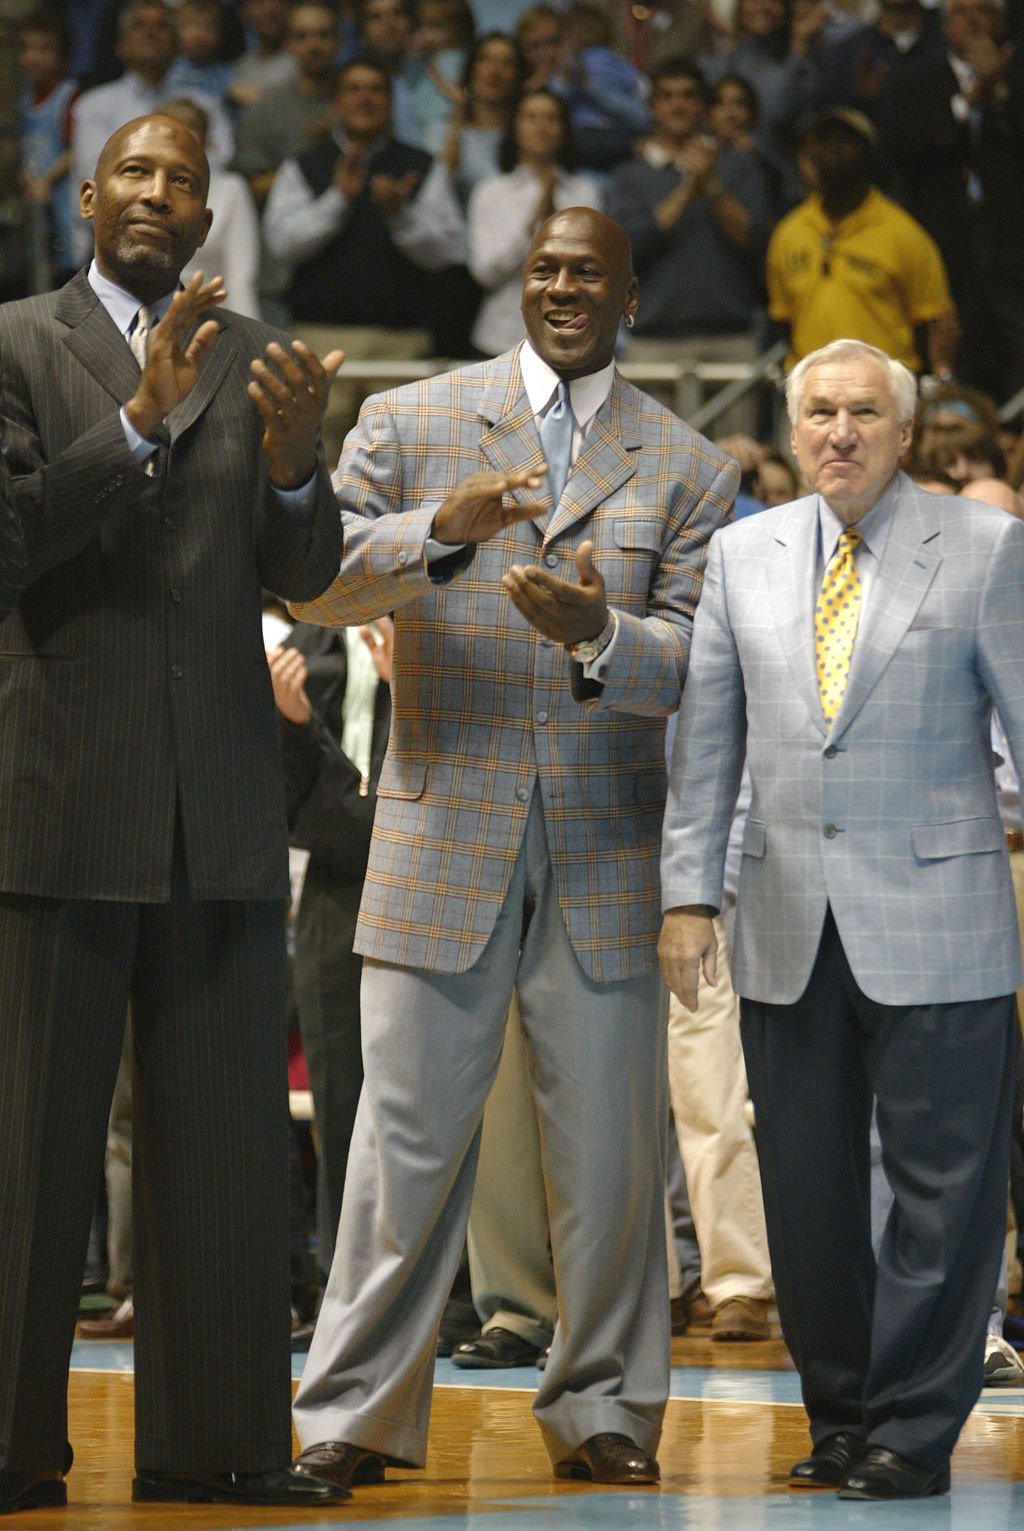 Michael Jordan, Dean Smith, and James Worthy at UNC Basketball game.